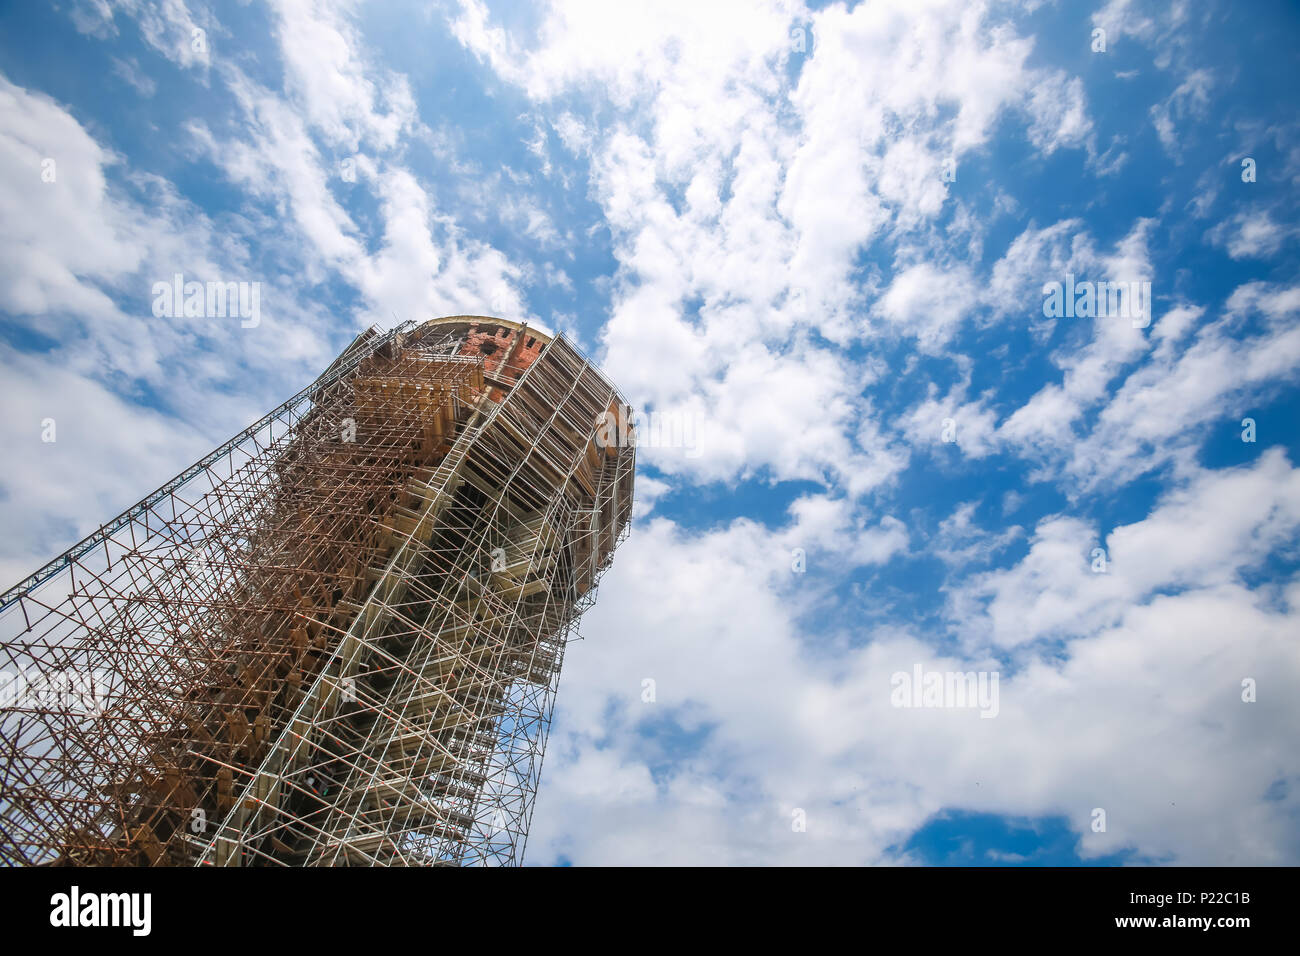 A low angle view of the Vukovar water tower under construction and intended to be a memorial place in Vukovar, Croatia. It is a symbol of the city suf Stock Photo